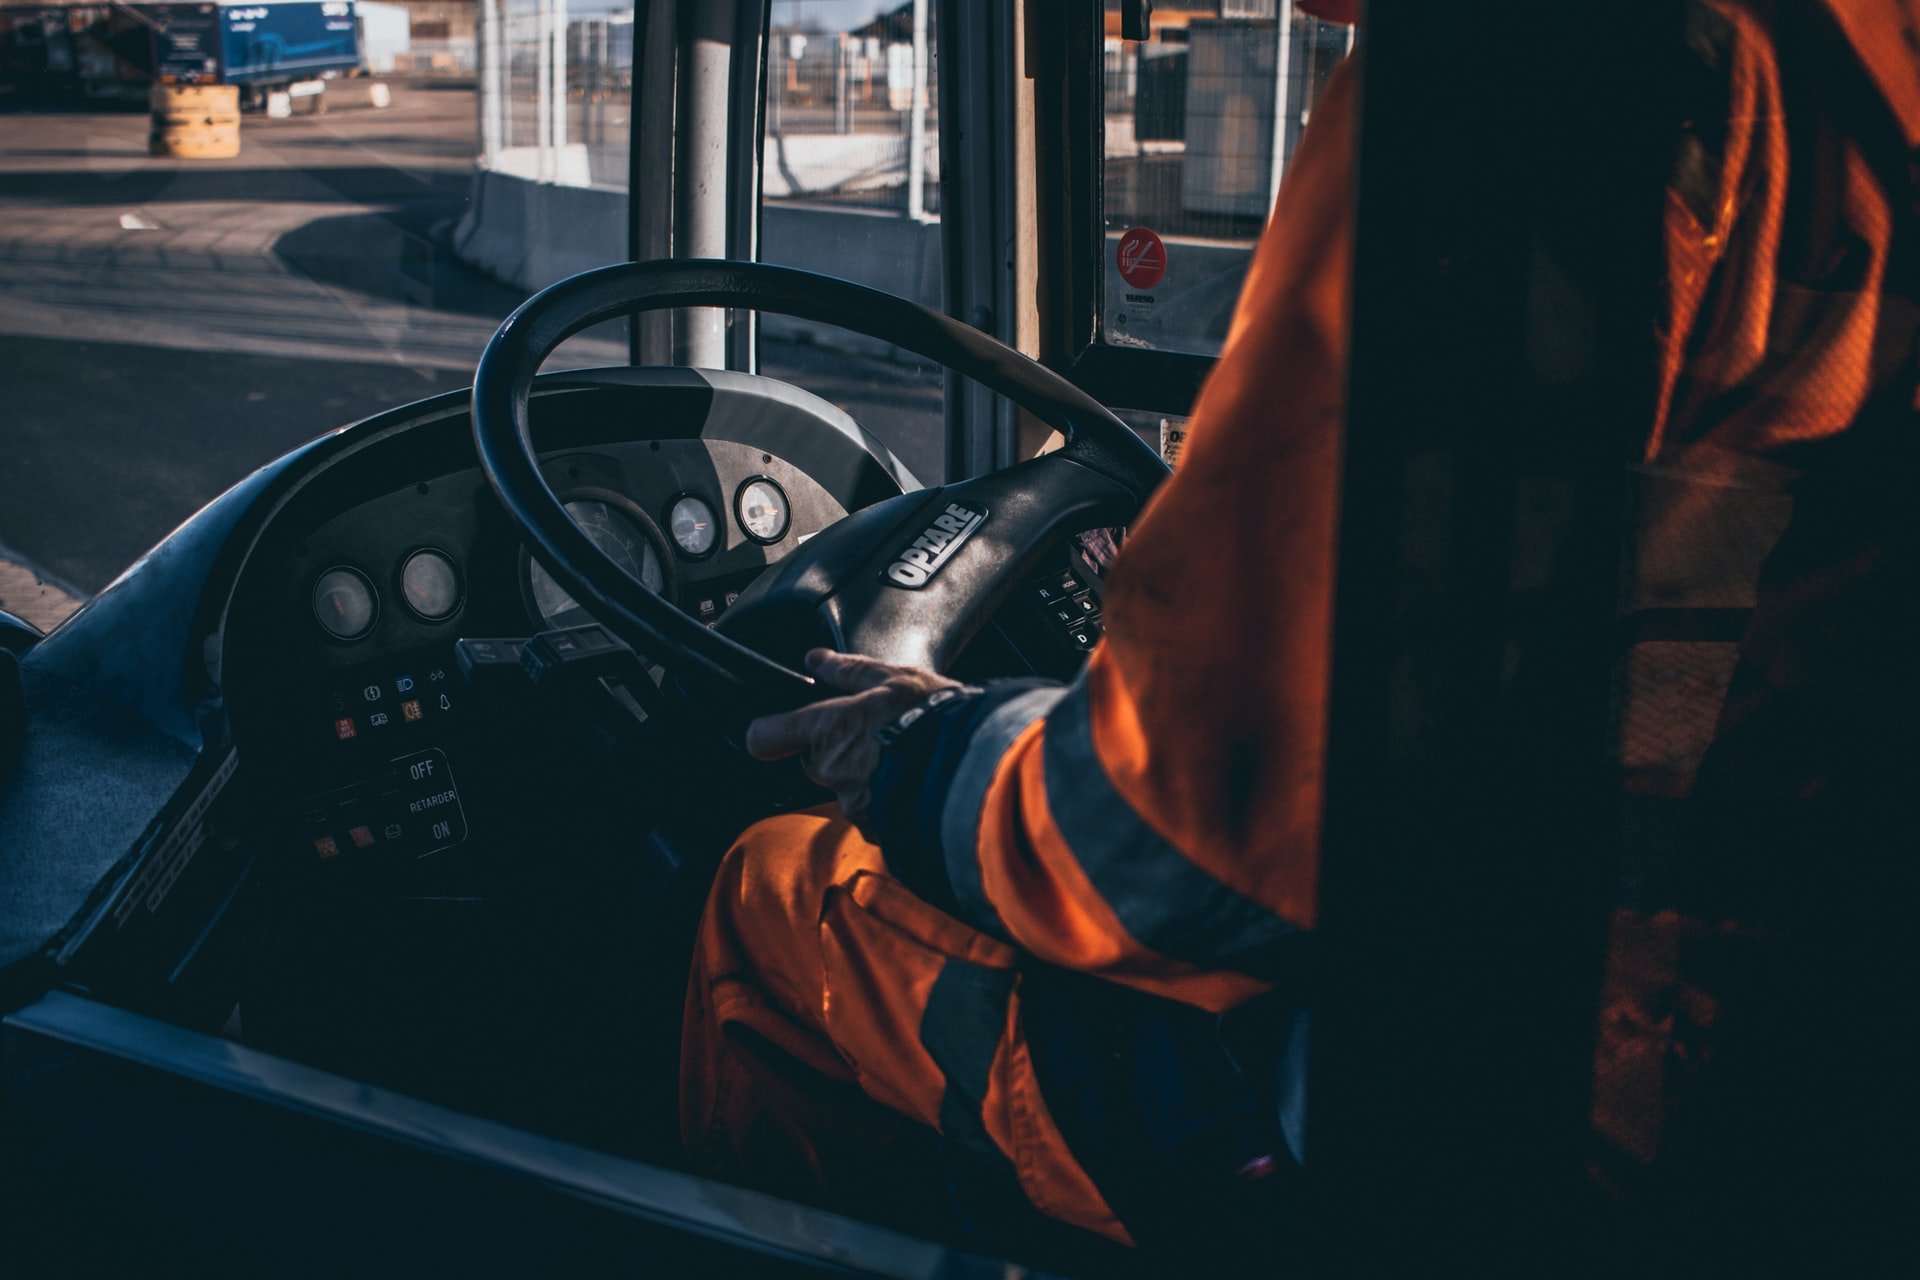 The boy approached the bus driver. | Source: Unsplash